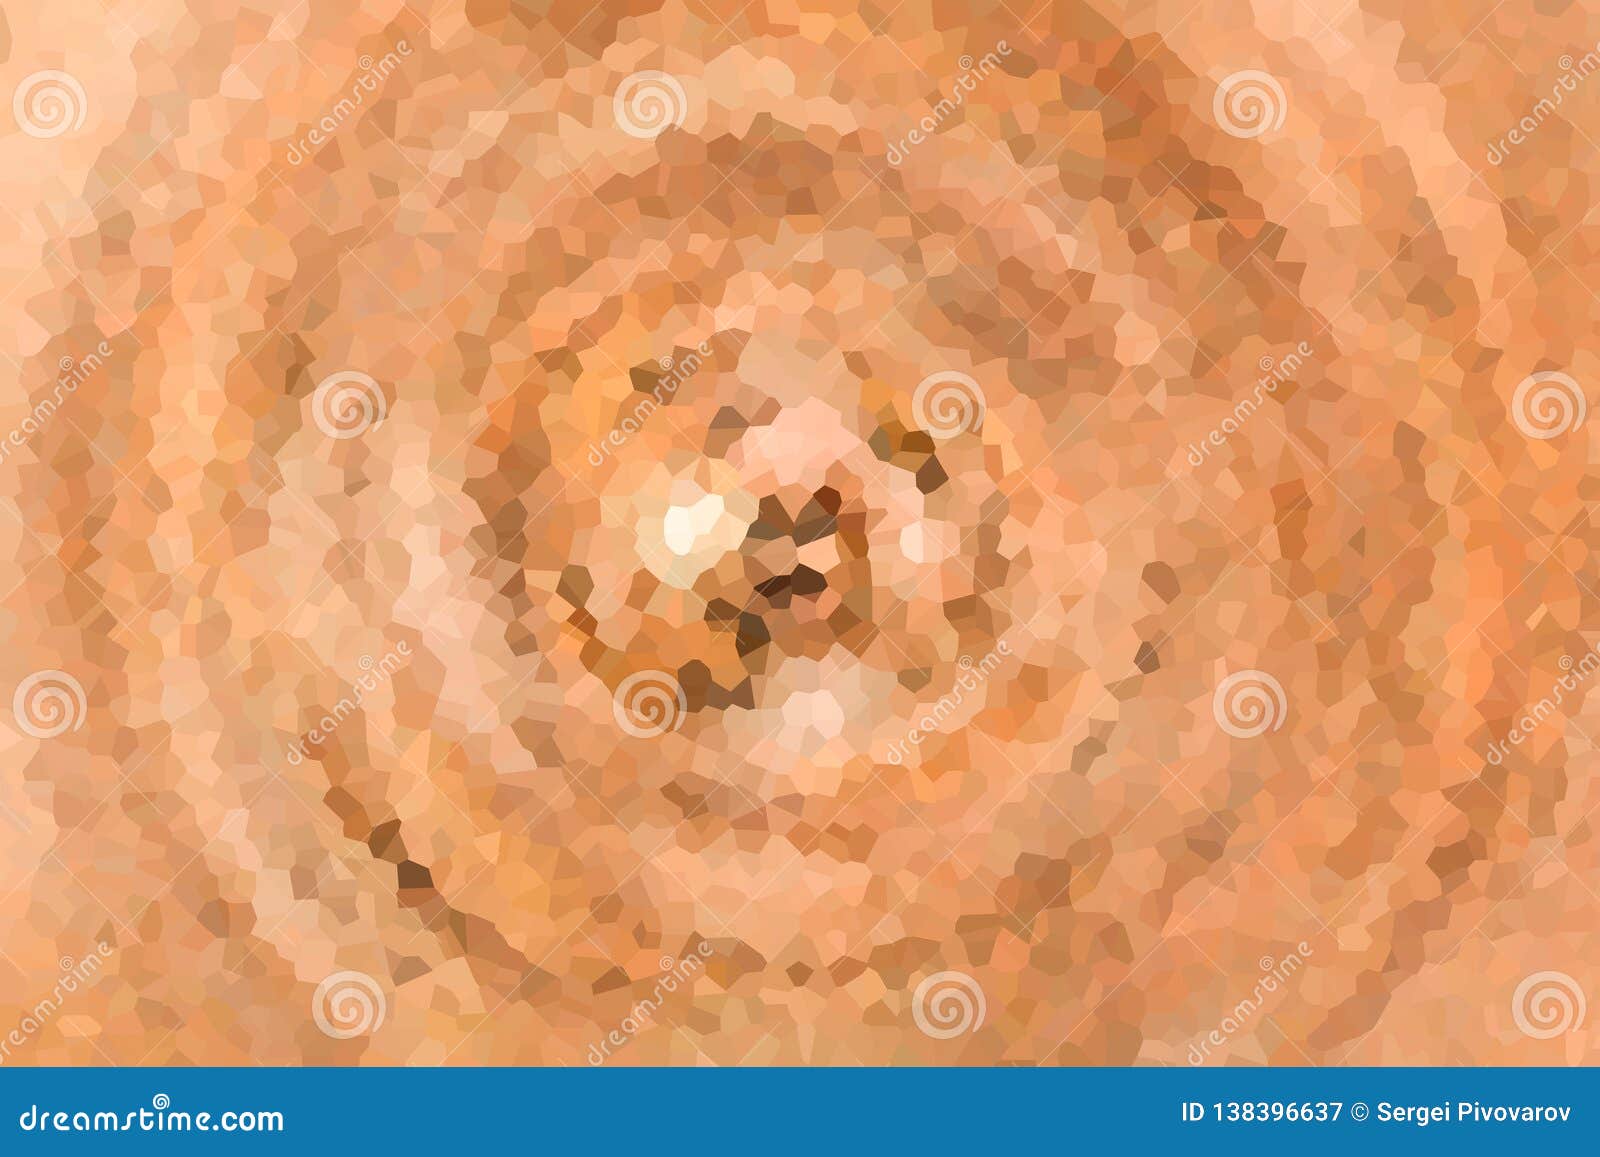 Brown Icy Mosaic Abstract Background Swirling Texture Effect